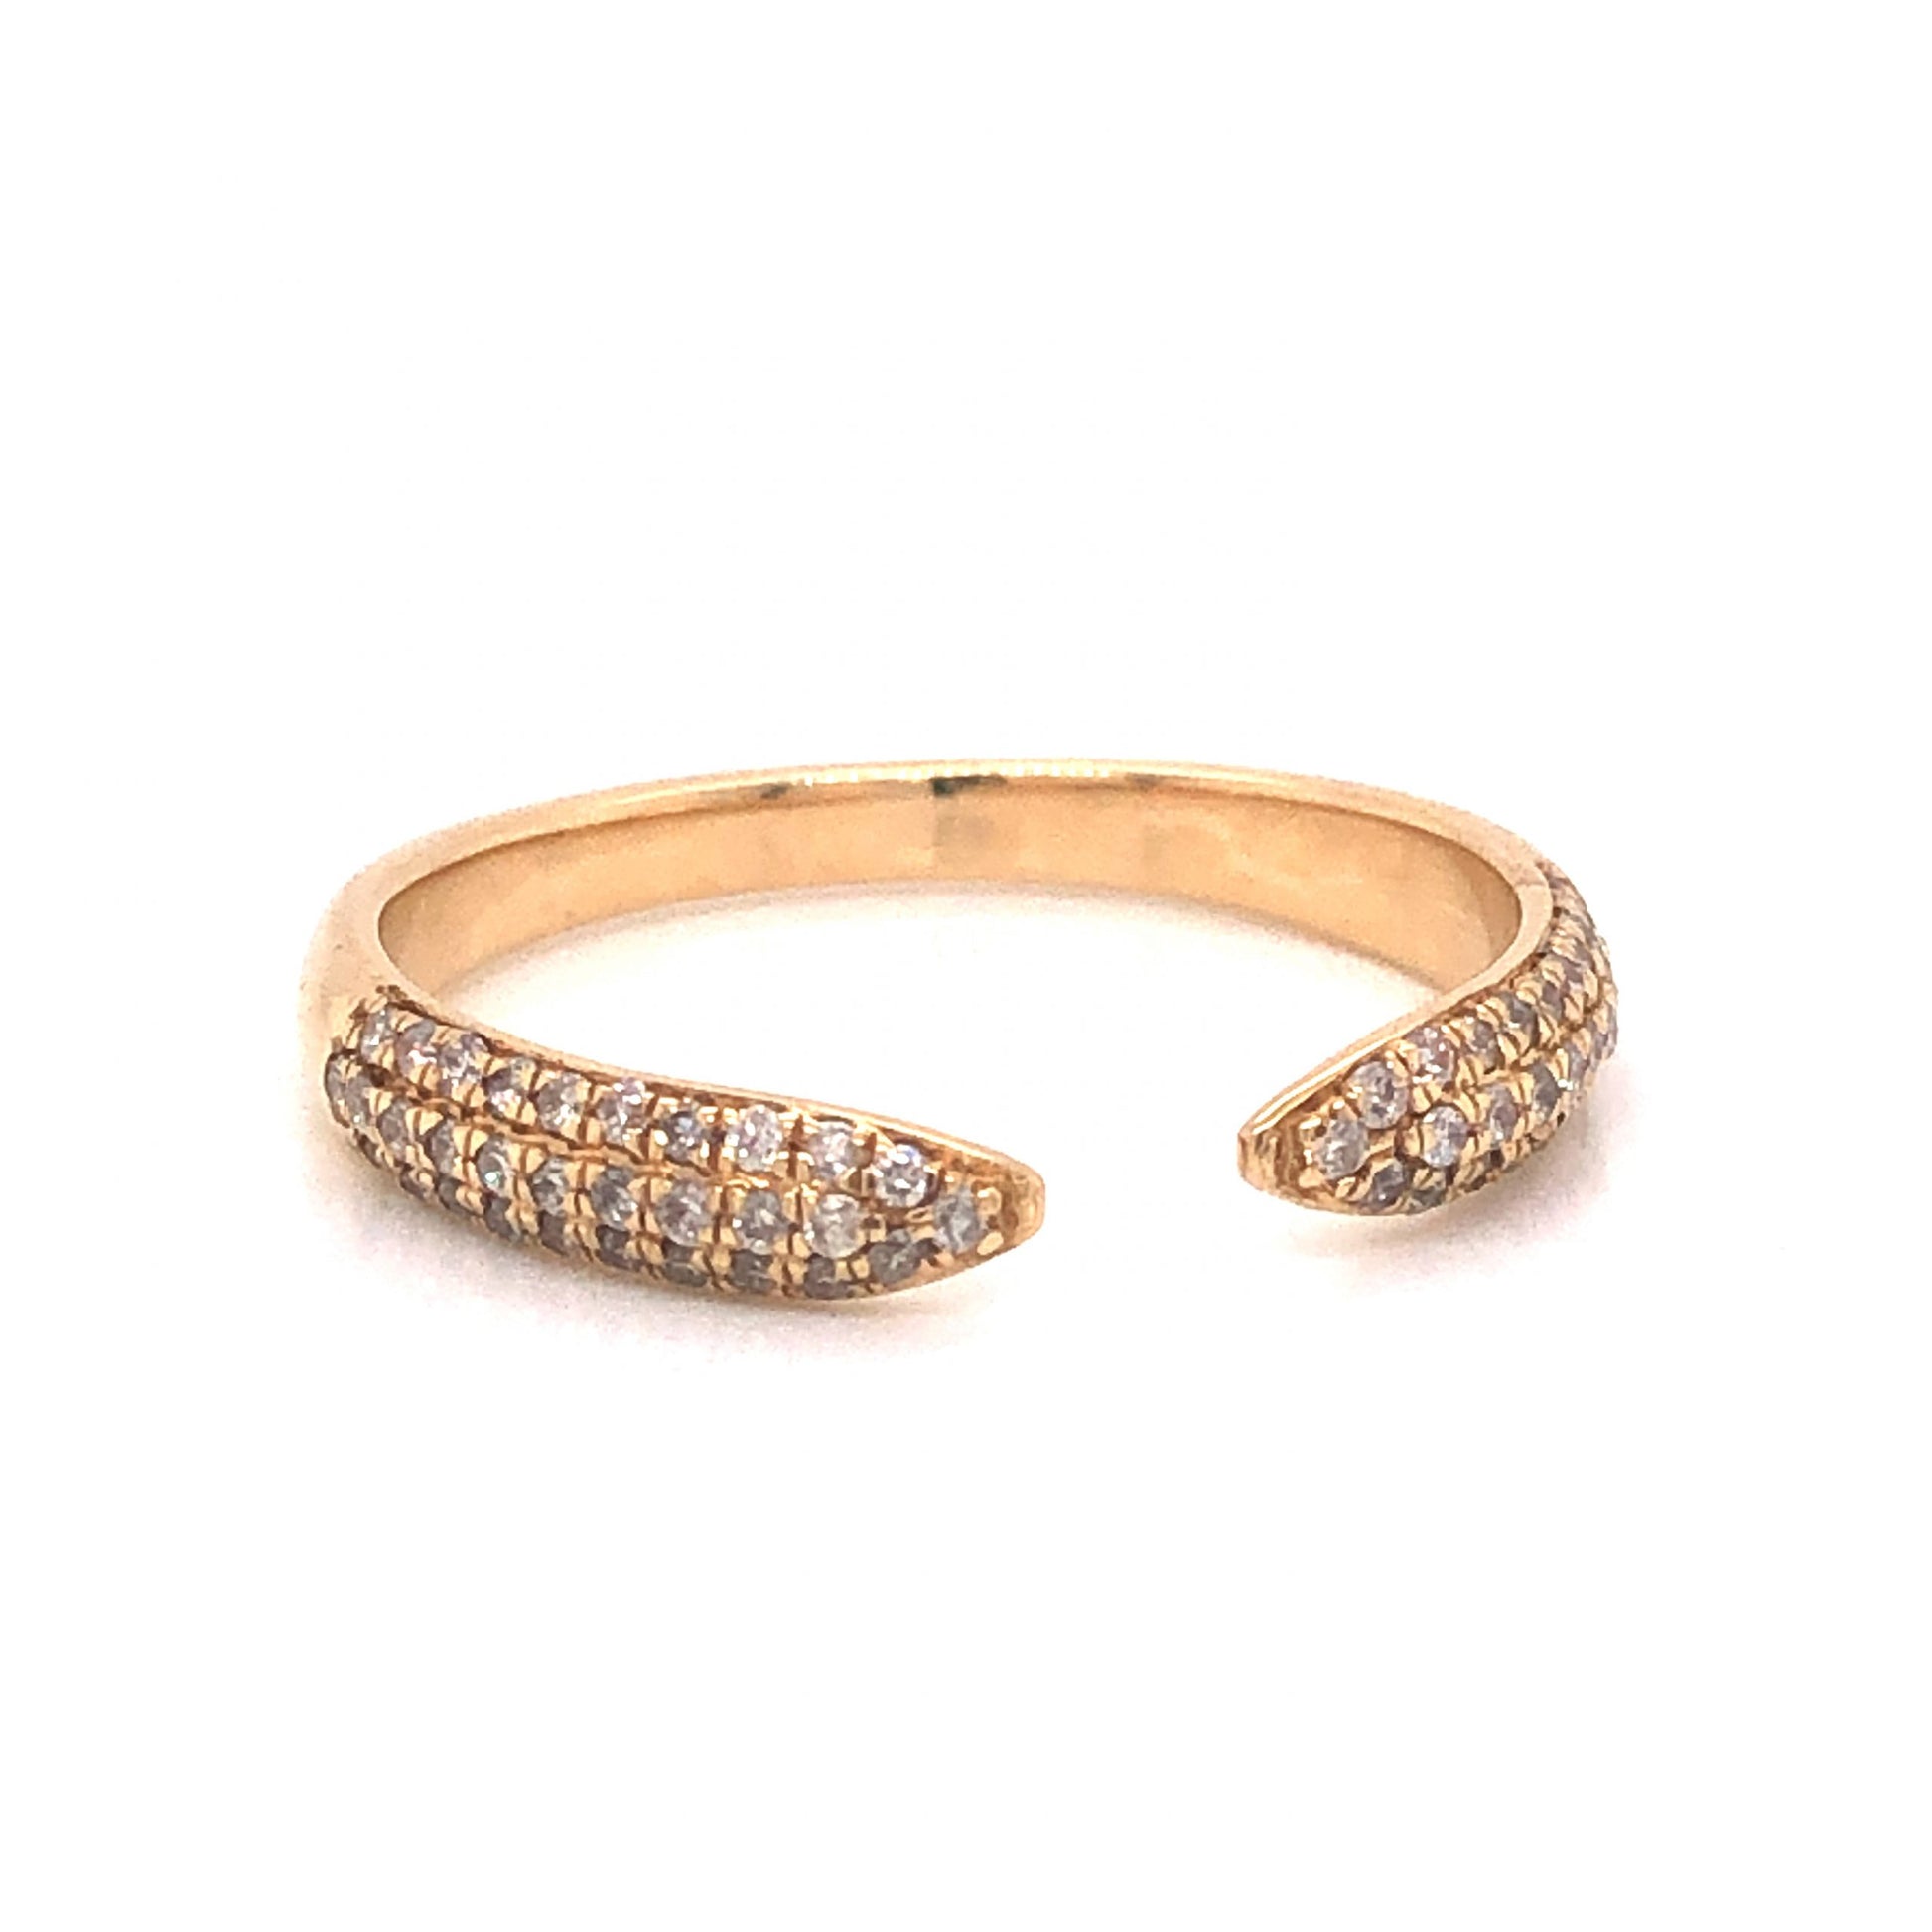 Open Pave Diamond Stacking Ring in 14k Yellow GoldComposition: 14 Karat Yellow Gold Ring Size: 8 Total Diamond Weight: .25ct Total Gram Weight: 2.2 g Inscription: 62/0.25 14k
      